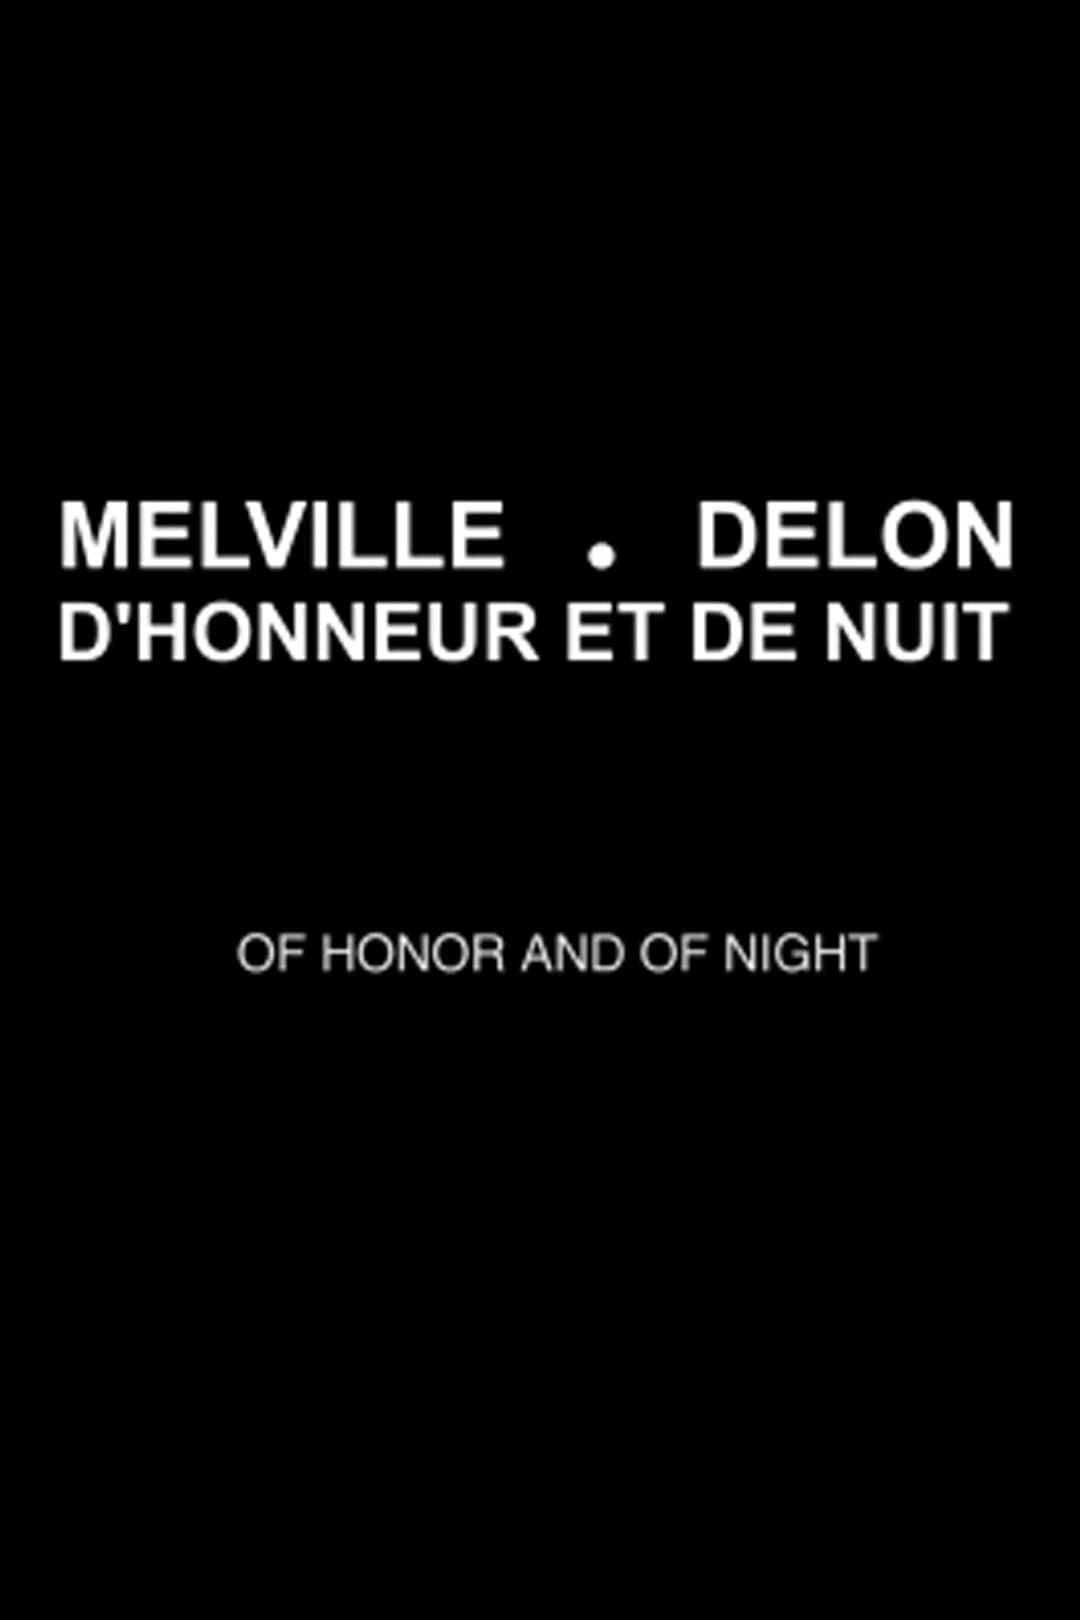 Melville-Delon: Honor and Night (2011)